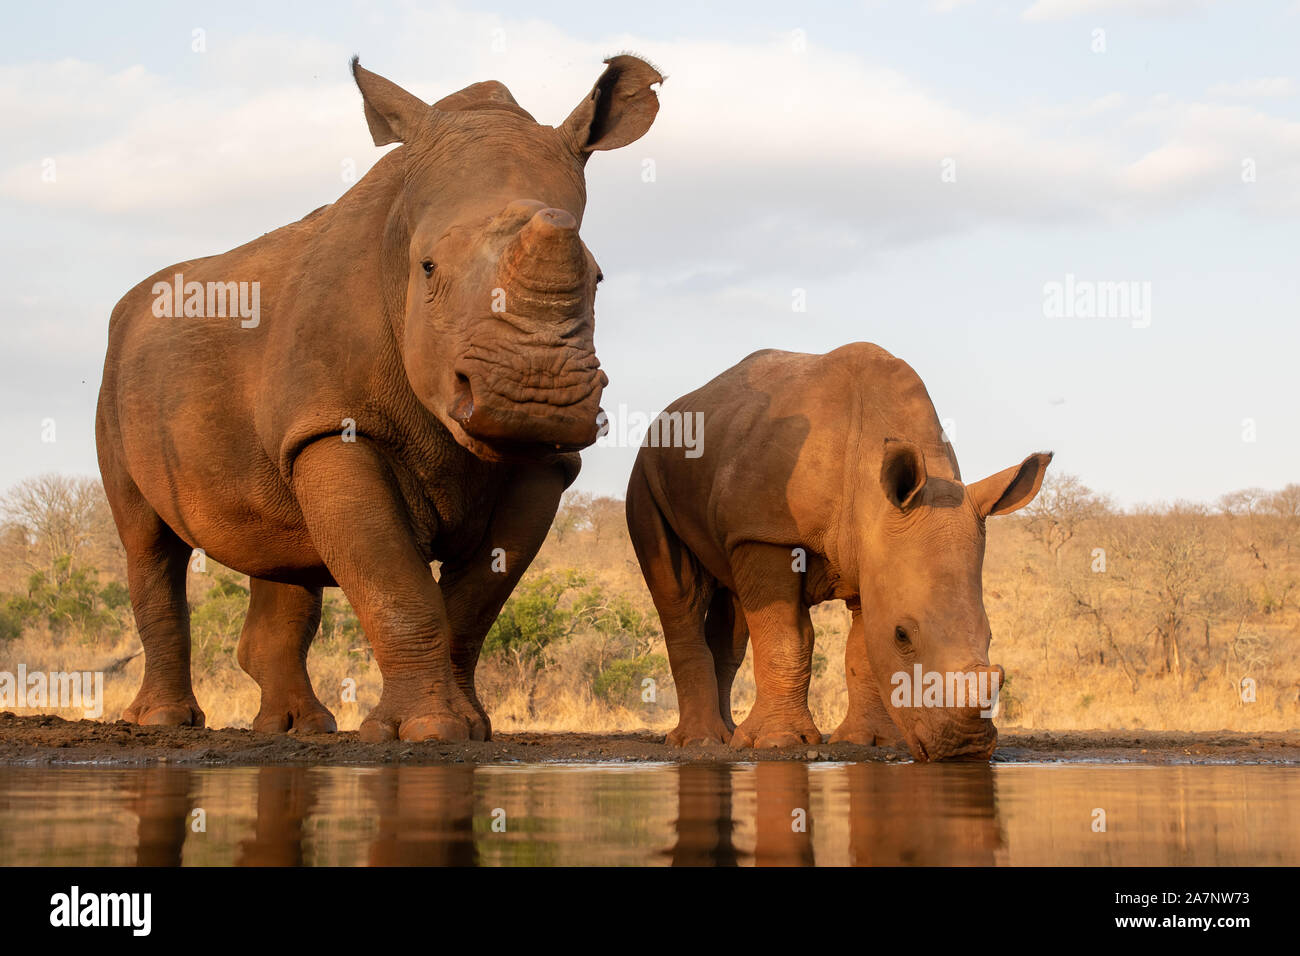 An adult and baby rhinoceros drinking together from a pool in Zimanga private game reserver Stock Photo